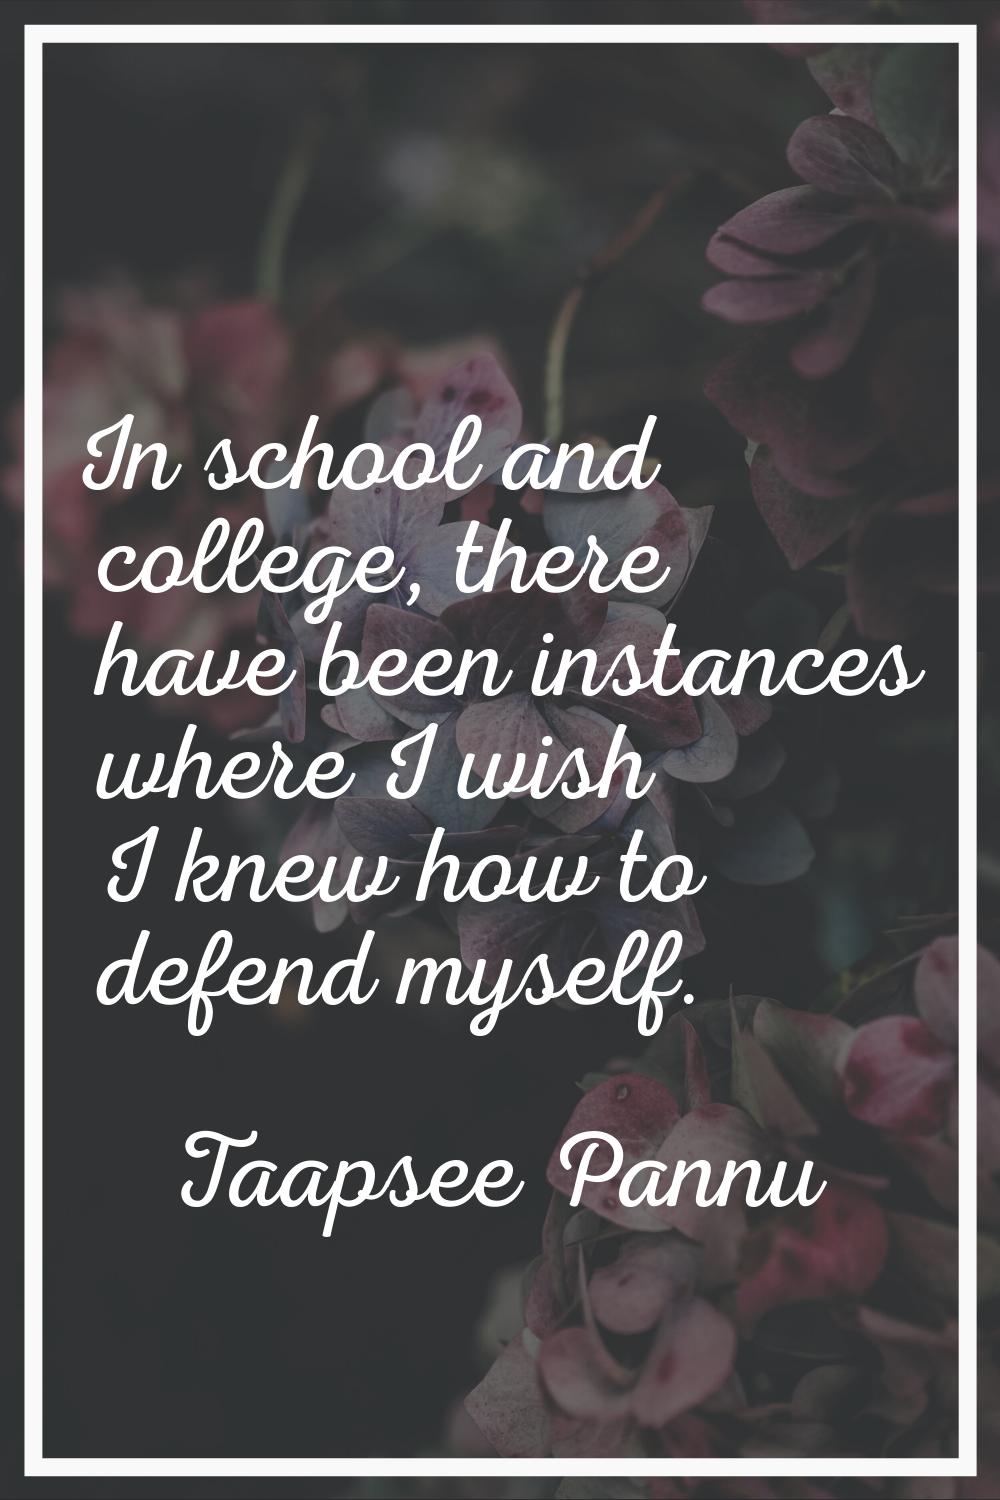 In school and college, there have been instances where I wish I knew how to defend myself.